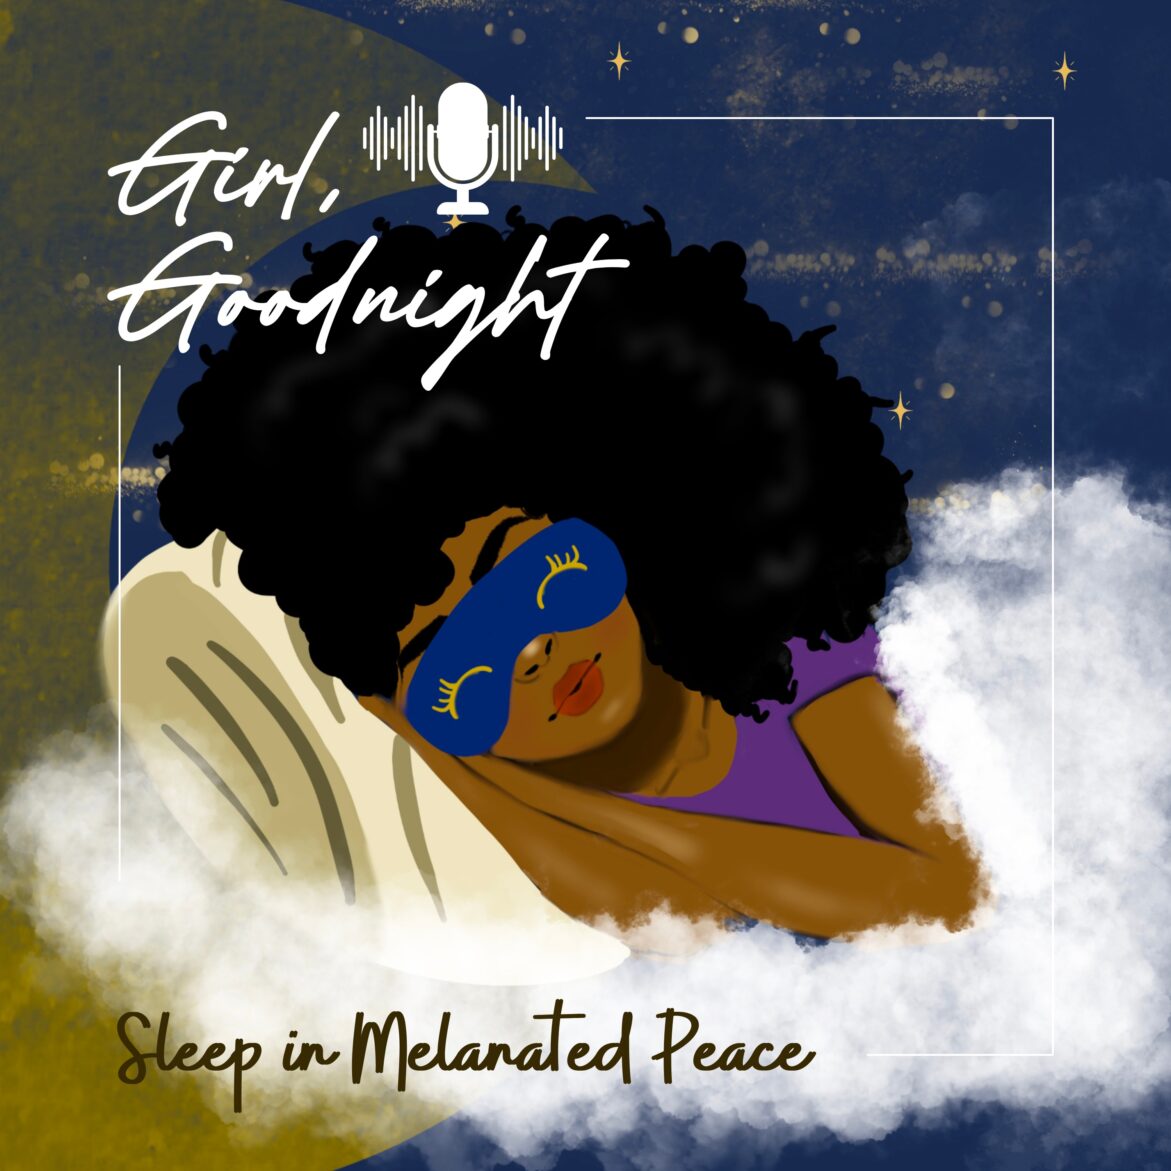 Black Podcasting - The Girl, Goodnight Cap- Passages from a Put Together Broken Heart pt 2